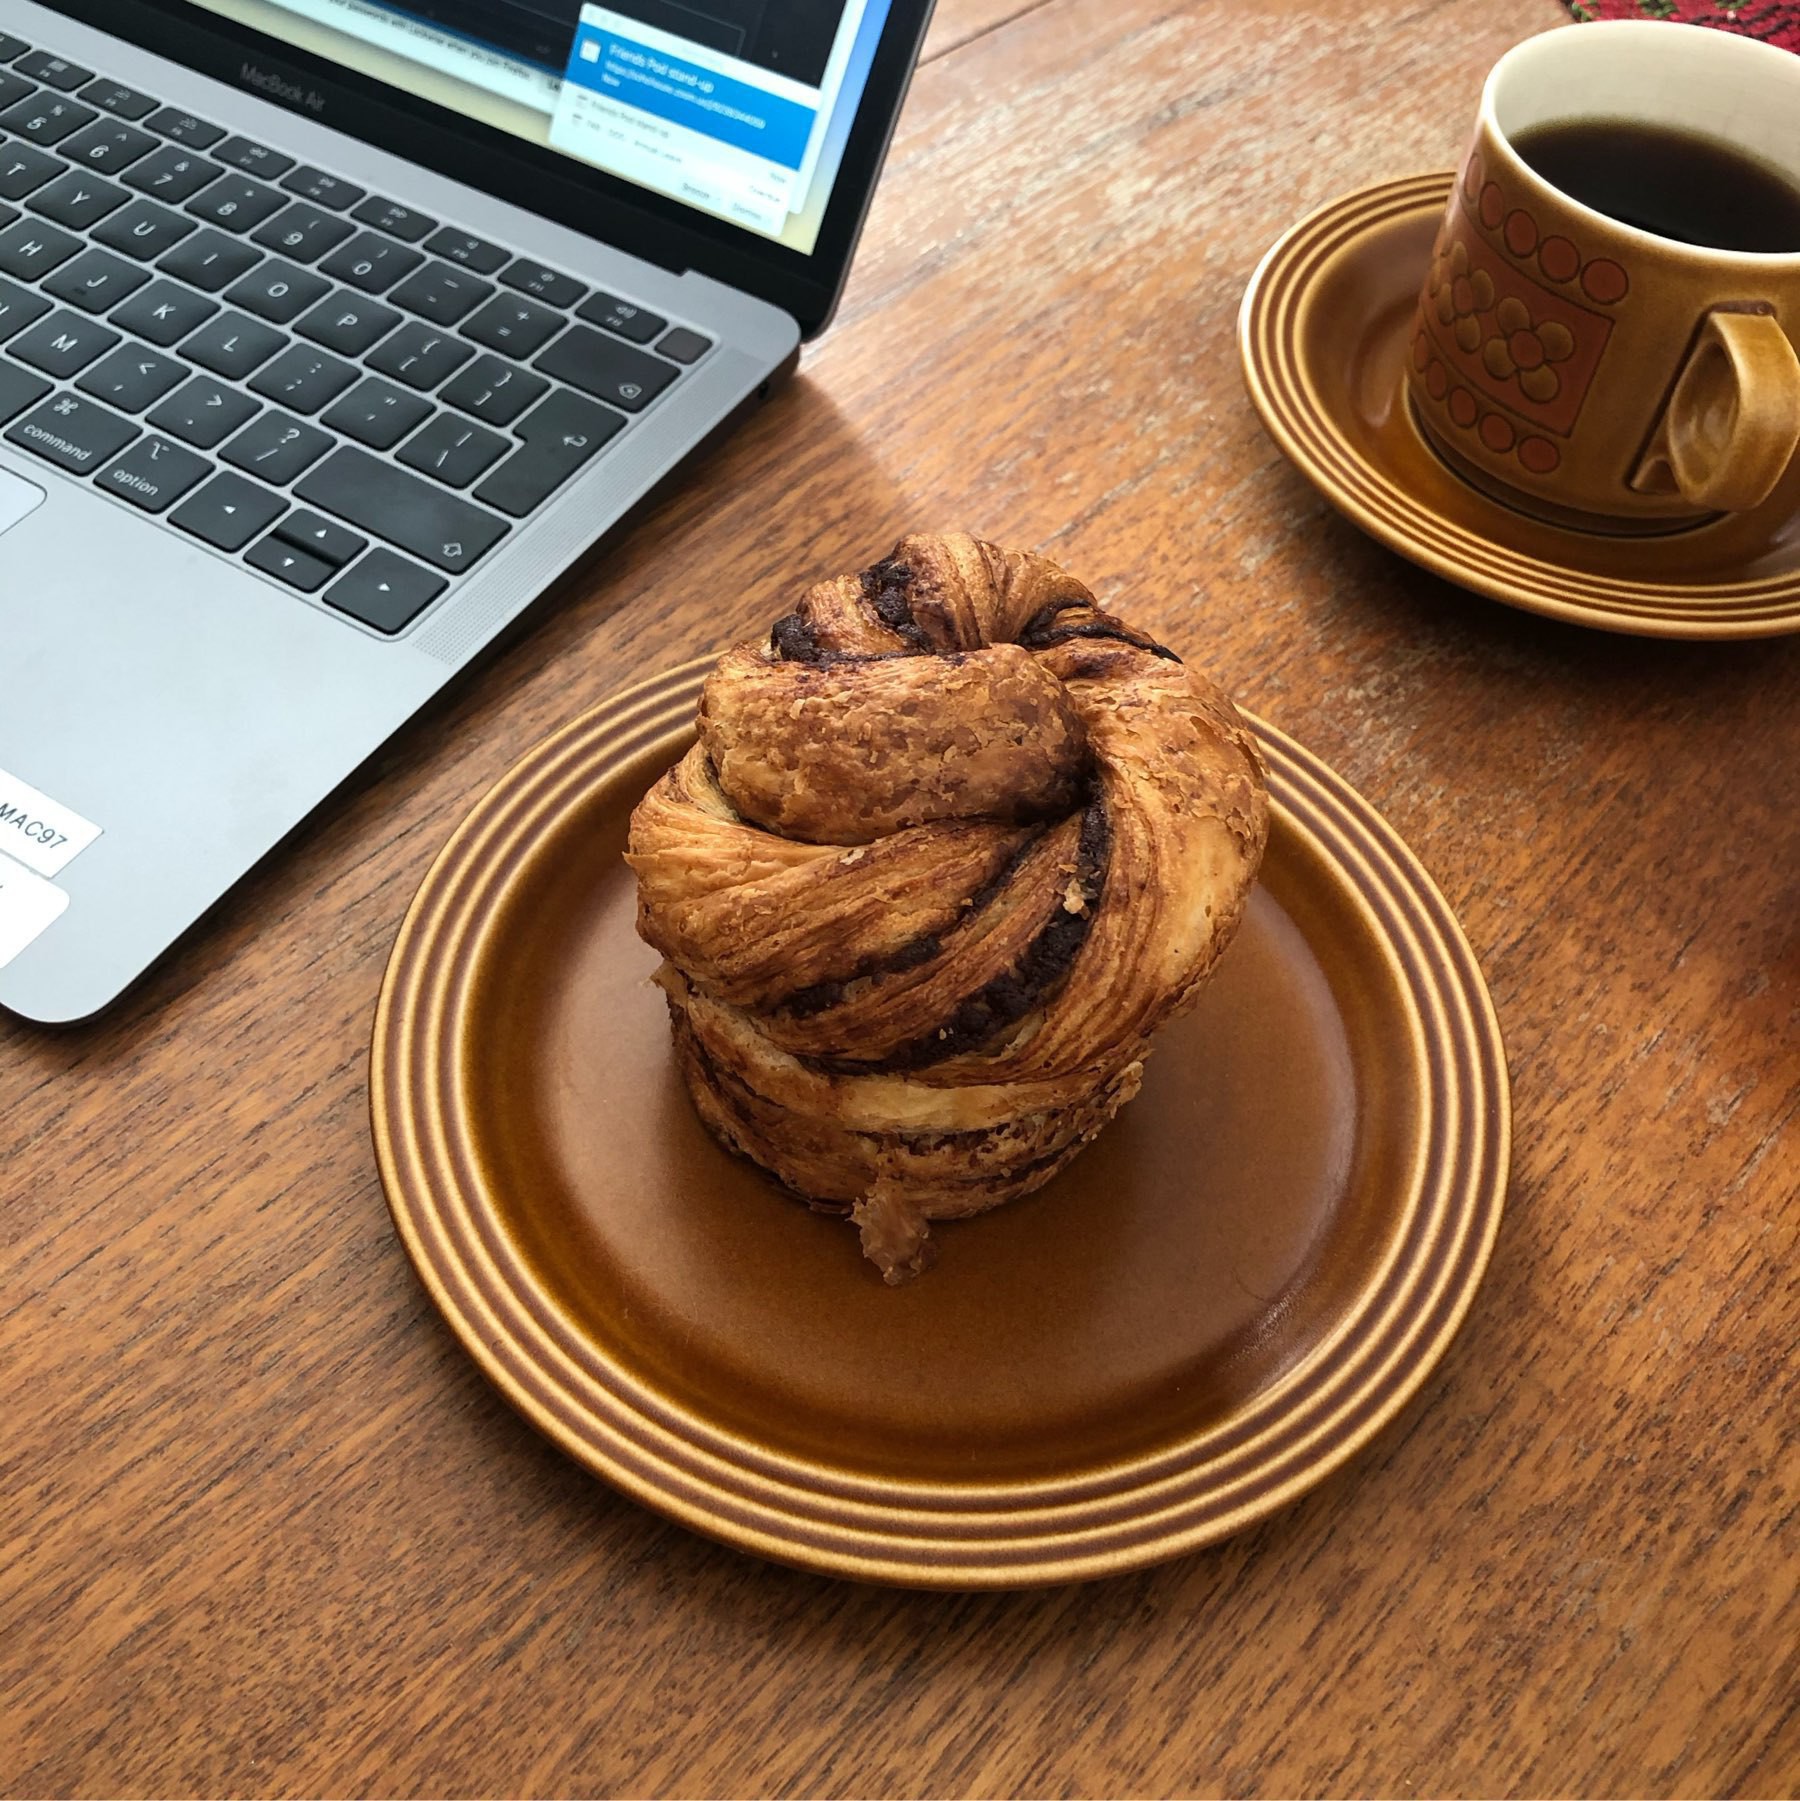 Cinnamon bun on a brown plate next to my MacBook Air and a nice cup of coffee.